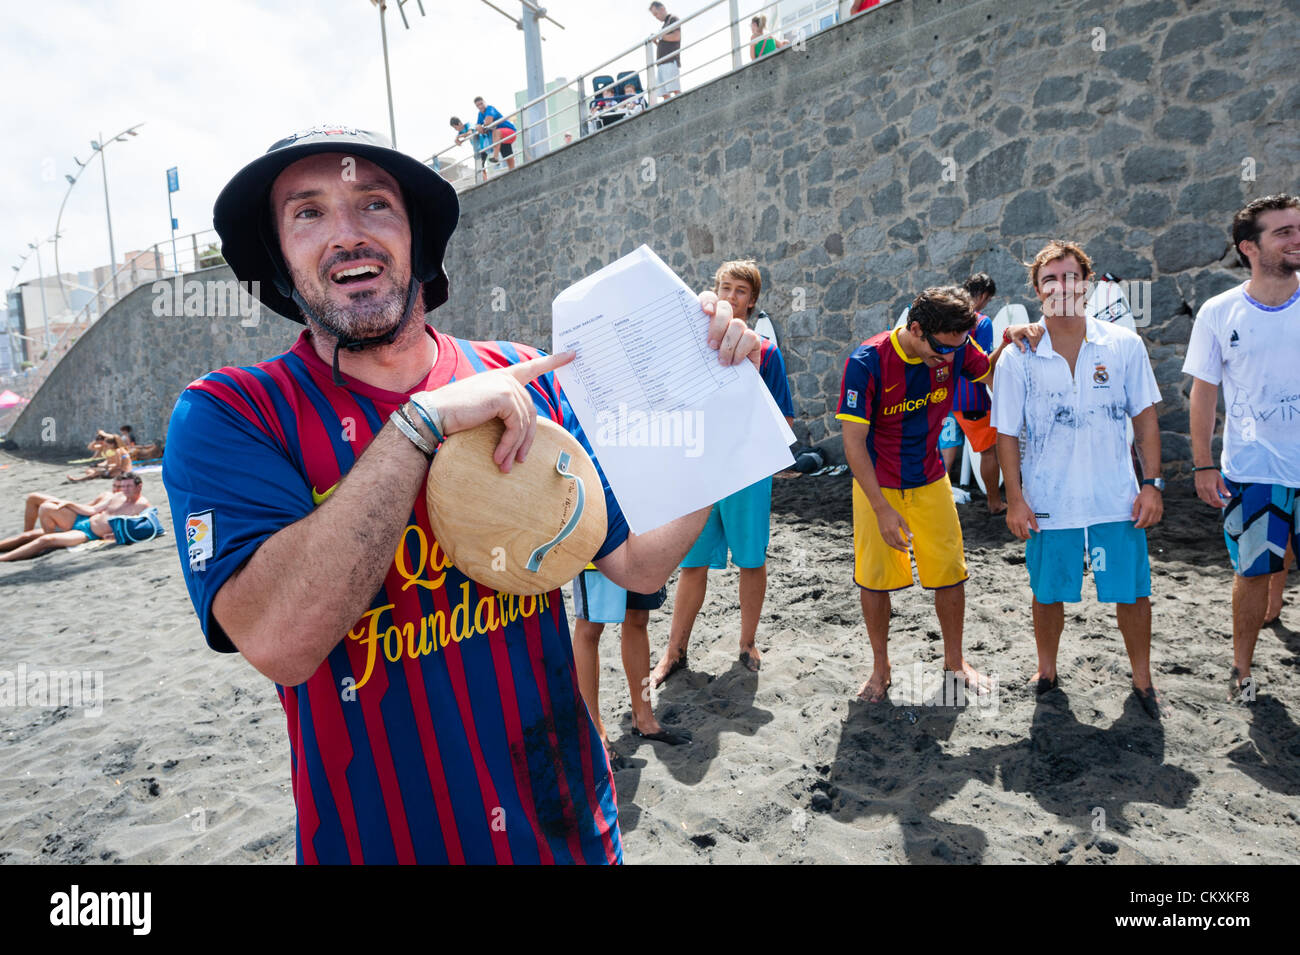 LAS PALMAS, CANARIAS ISLANDS, SPAIN–AUGUST 29, 2012: Unidentified young surfers from University Surf School and Surf Camp Las Palmas during an informal competition, formed as an football match with 11 surfers in each team, one team is wearing T-shirts from football club F.C. Barcelona, the other one from Real Madrid. Stock Photo